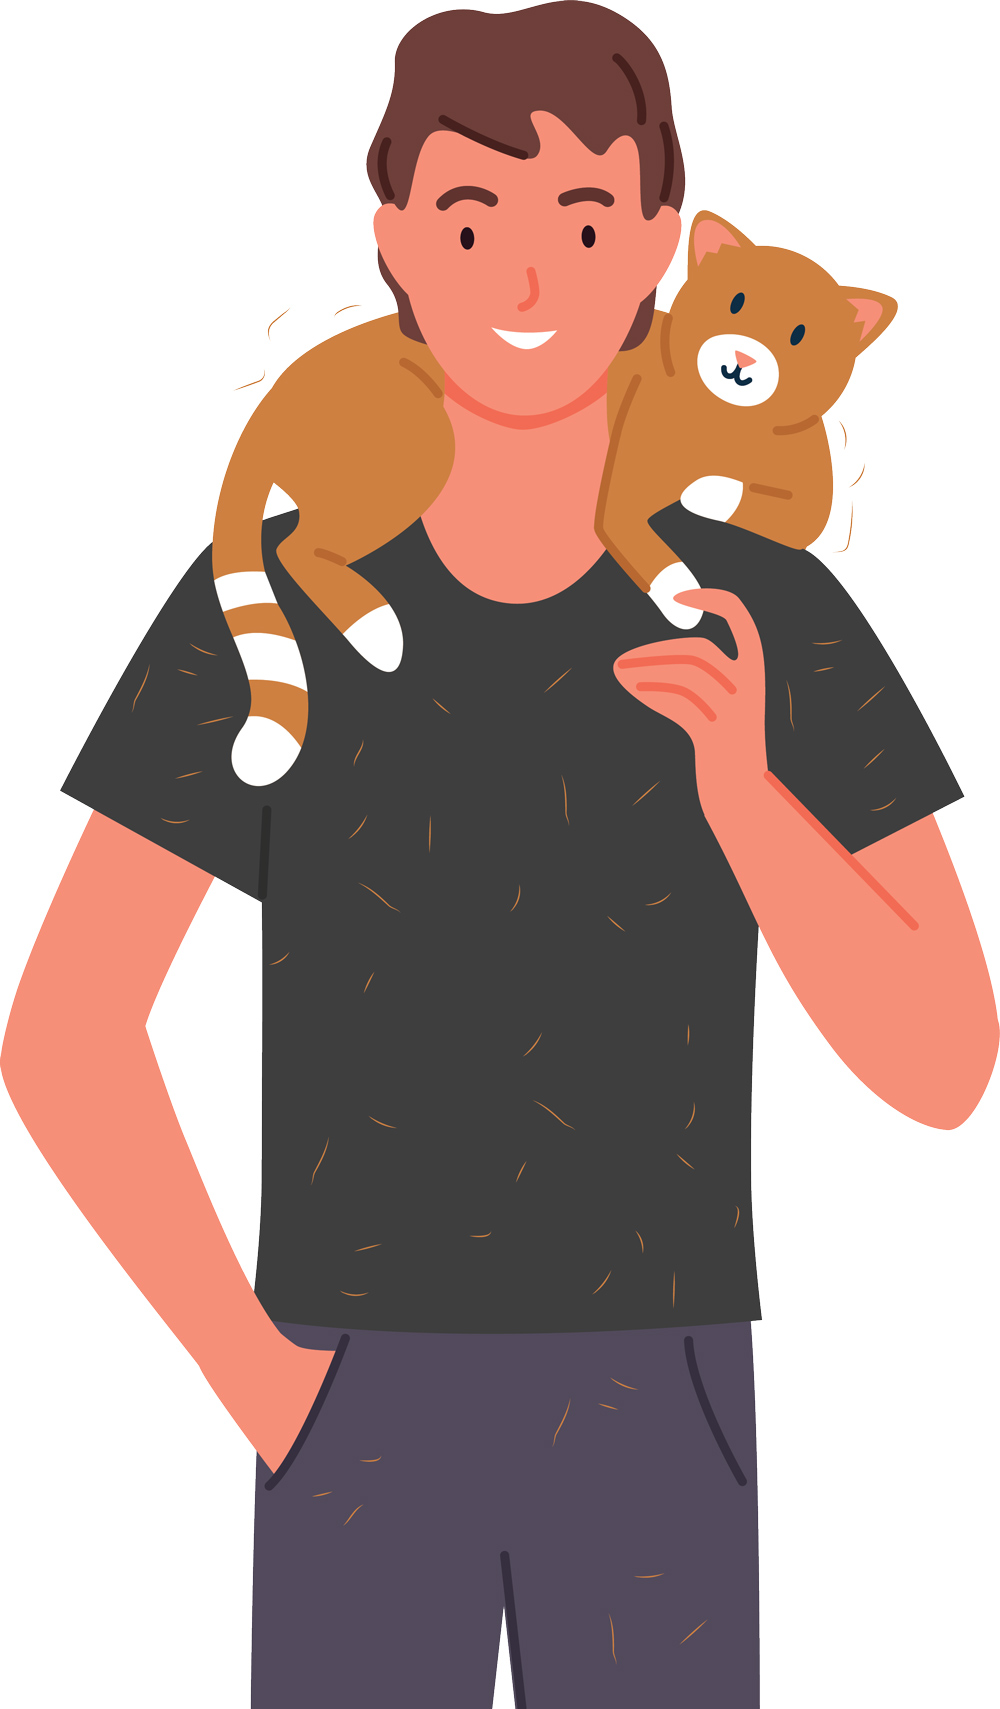 digital illustration of a man with a cat sitting on his shoulders and shedding hair